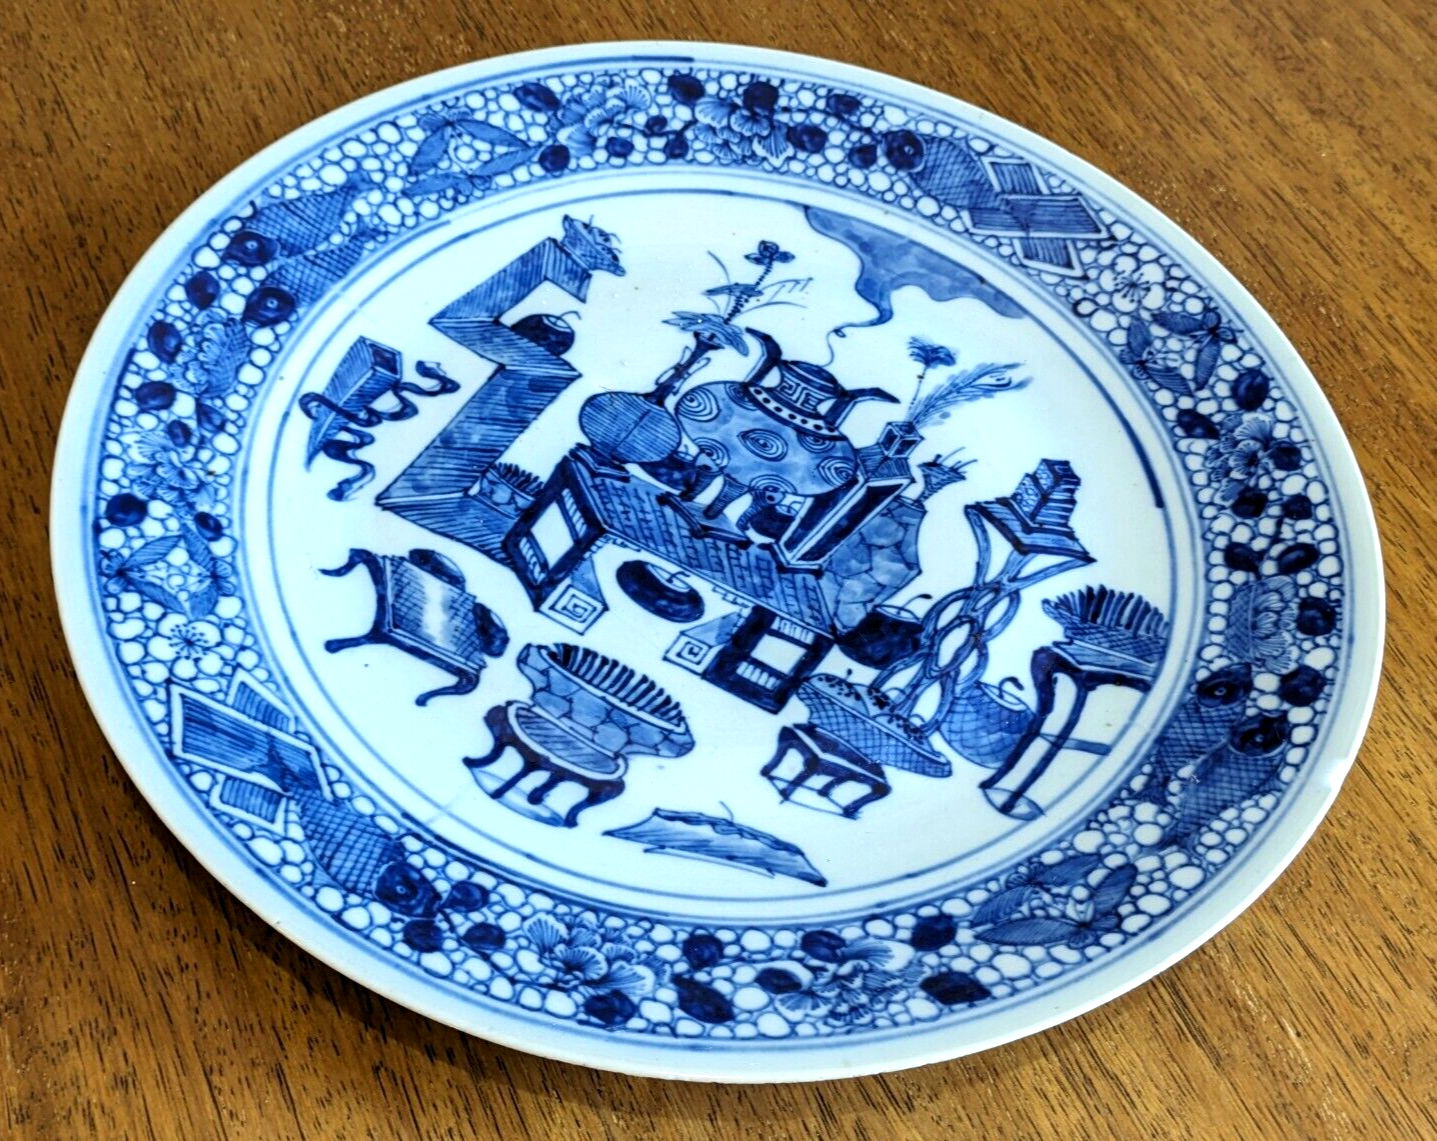 18th Century Chinese Blue & White Hundred Antiquities Object Porcelain Plate 12"